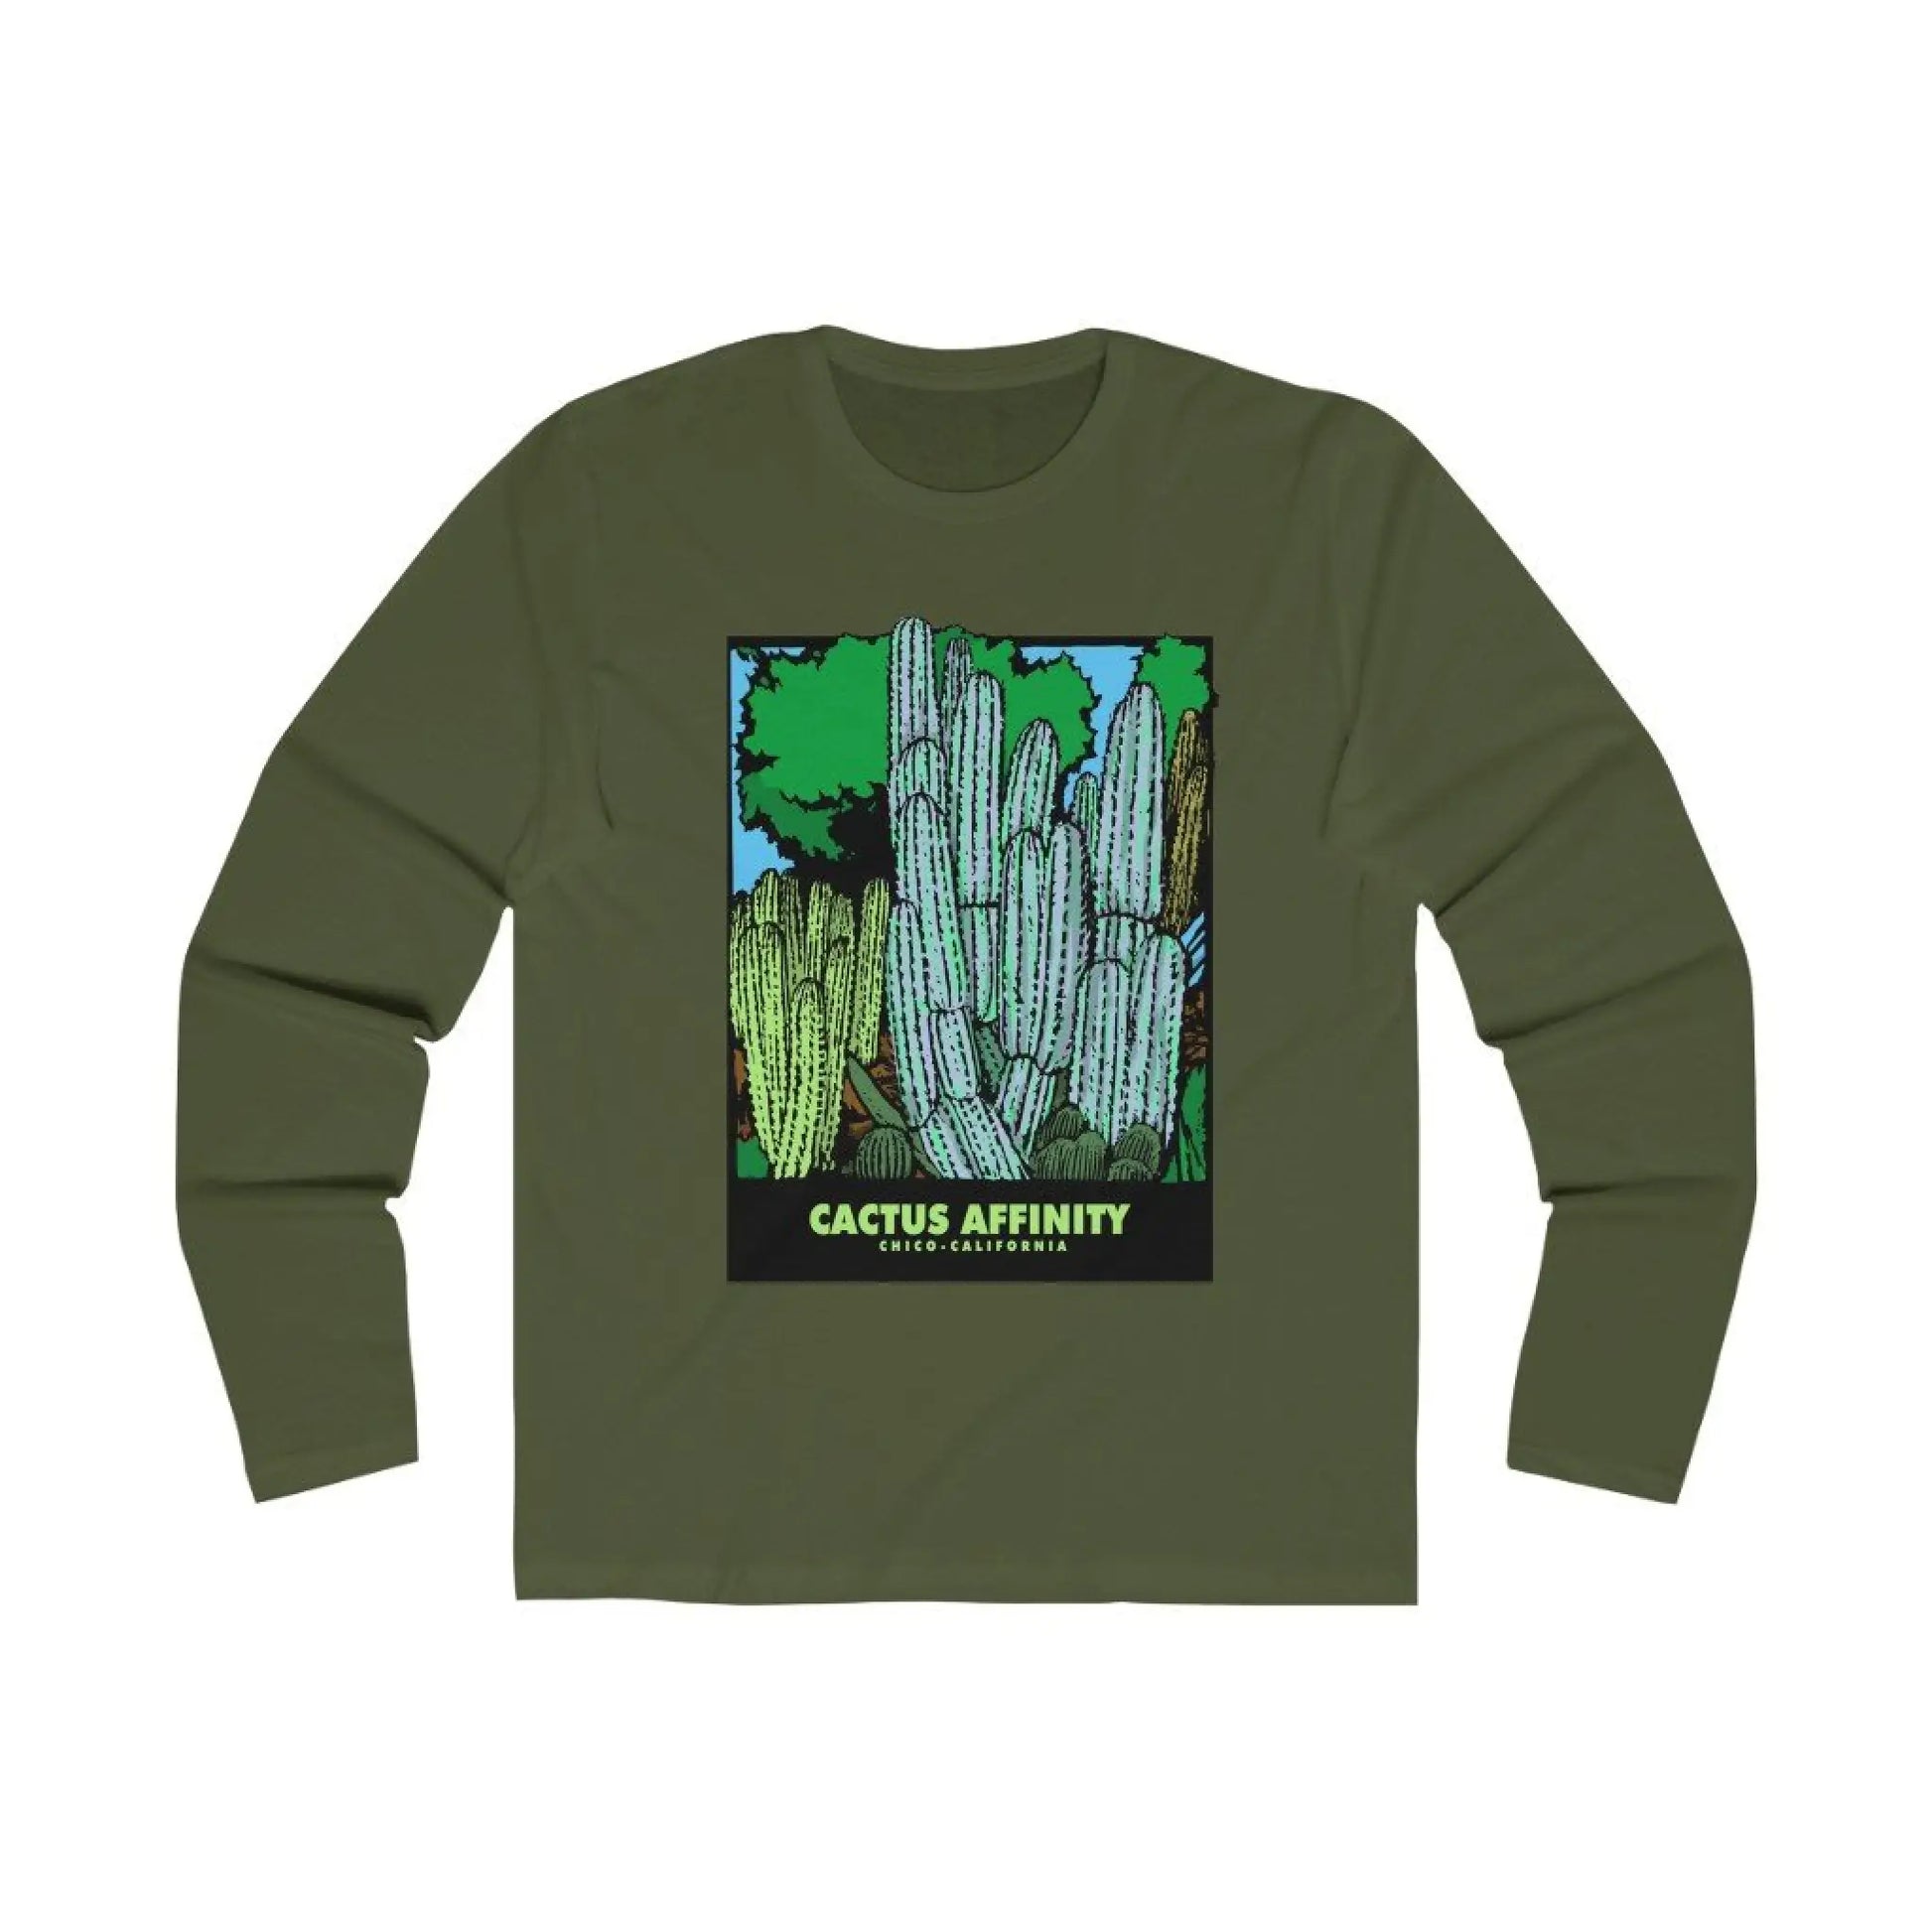 Men’s Long Sleeve Crew Tee - Chico - Solid Military Green /